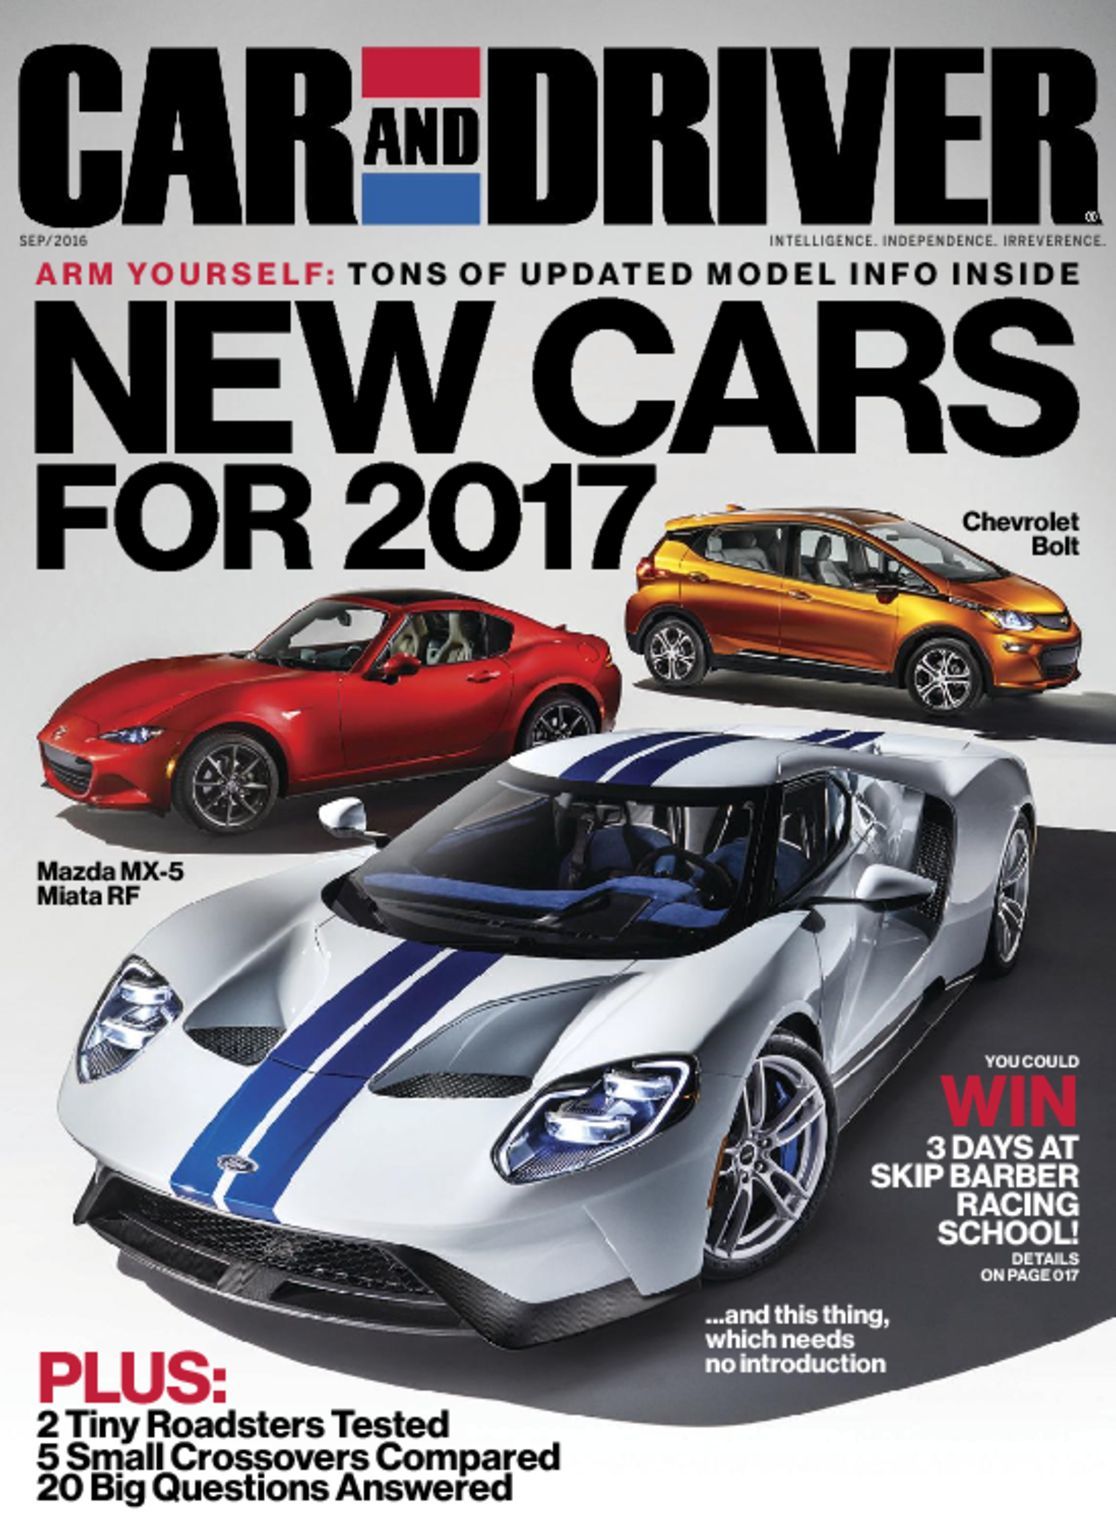 4430-car-and-driver-Cover-2016-September-1-Issue.jpg